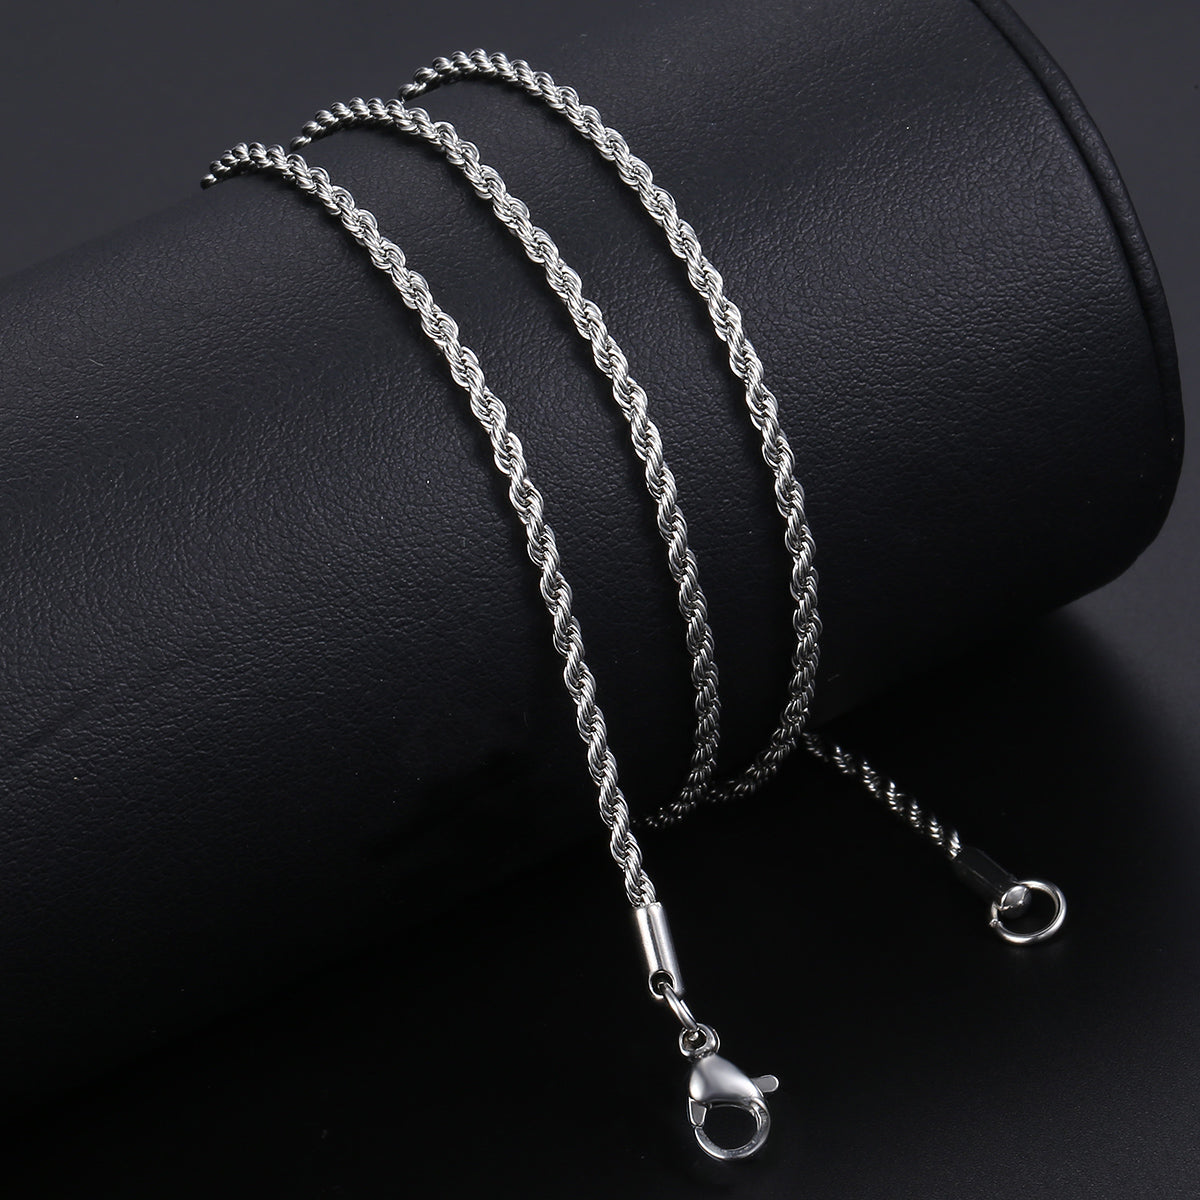 2mm Silver Rope Chain Necklace 18-26inch